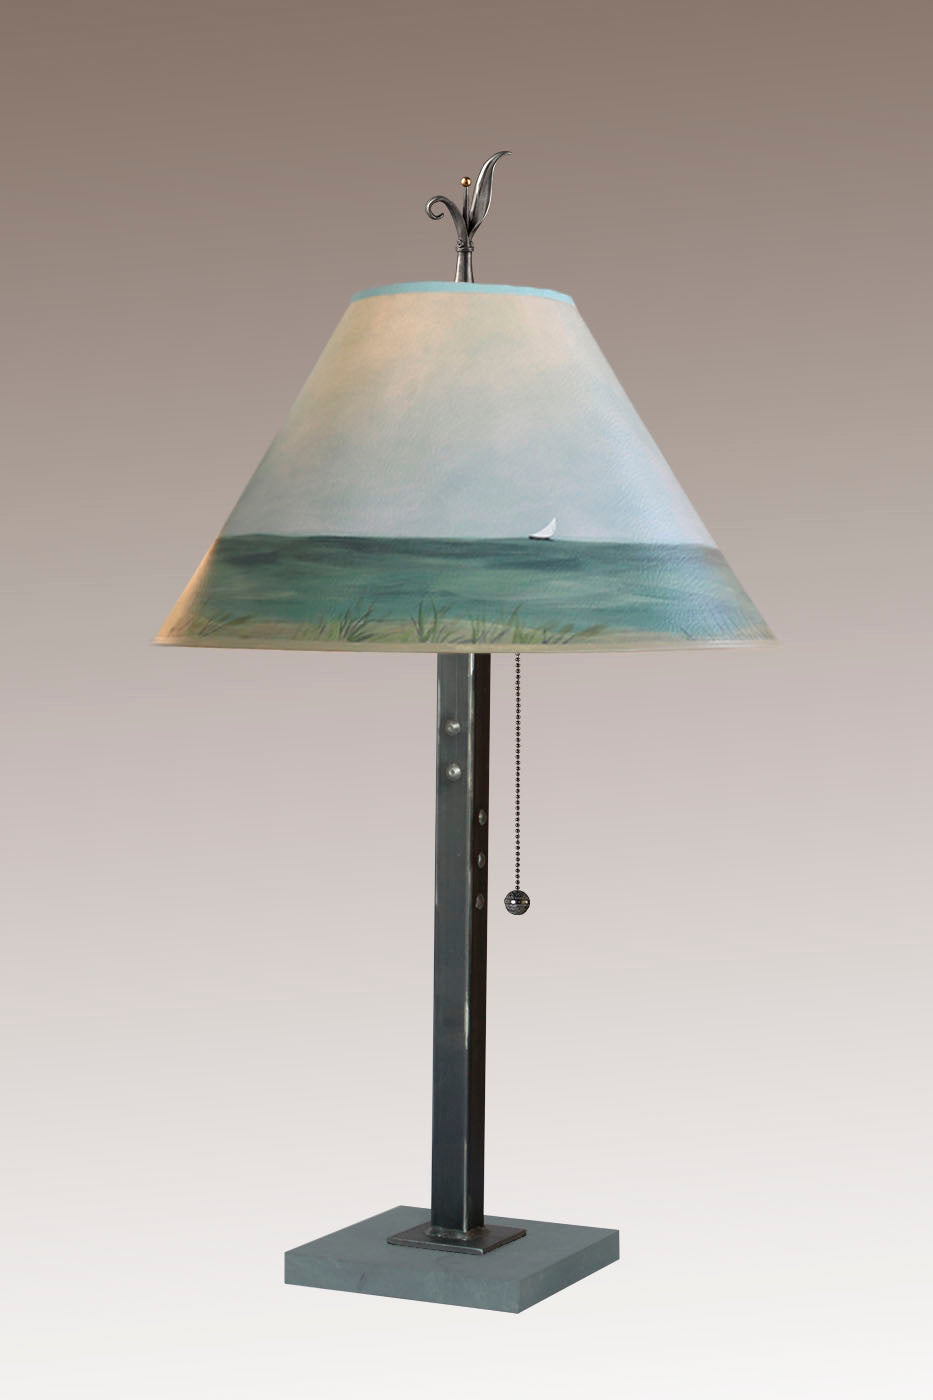 Janna Ugone & Co Table Lamps Steel Table Lamp with Medium Conical Shade in Shore